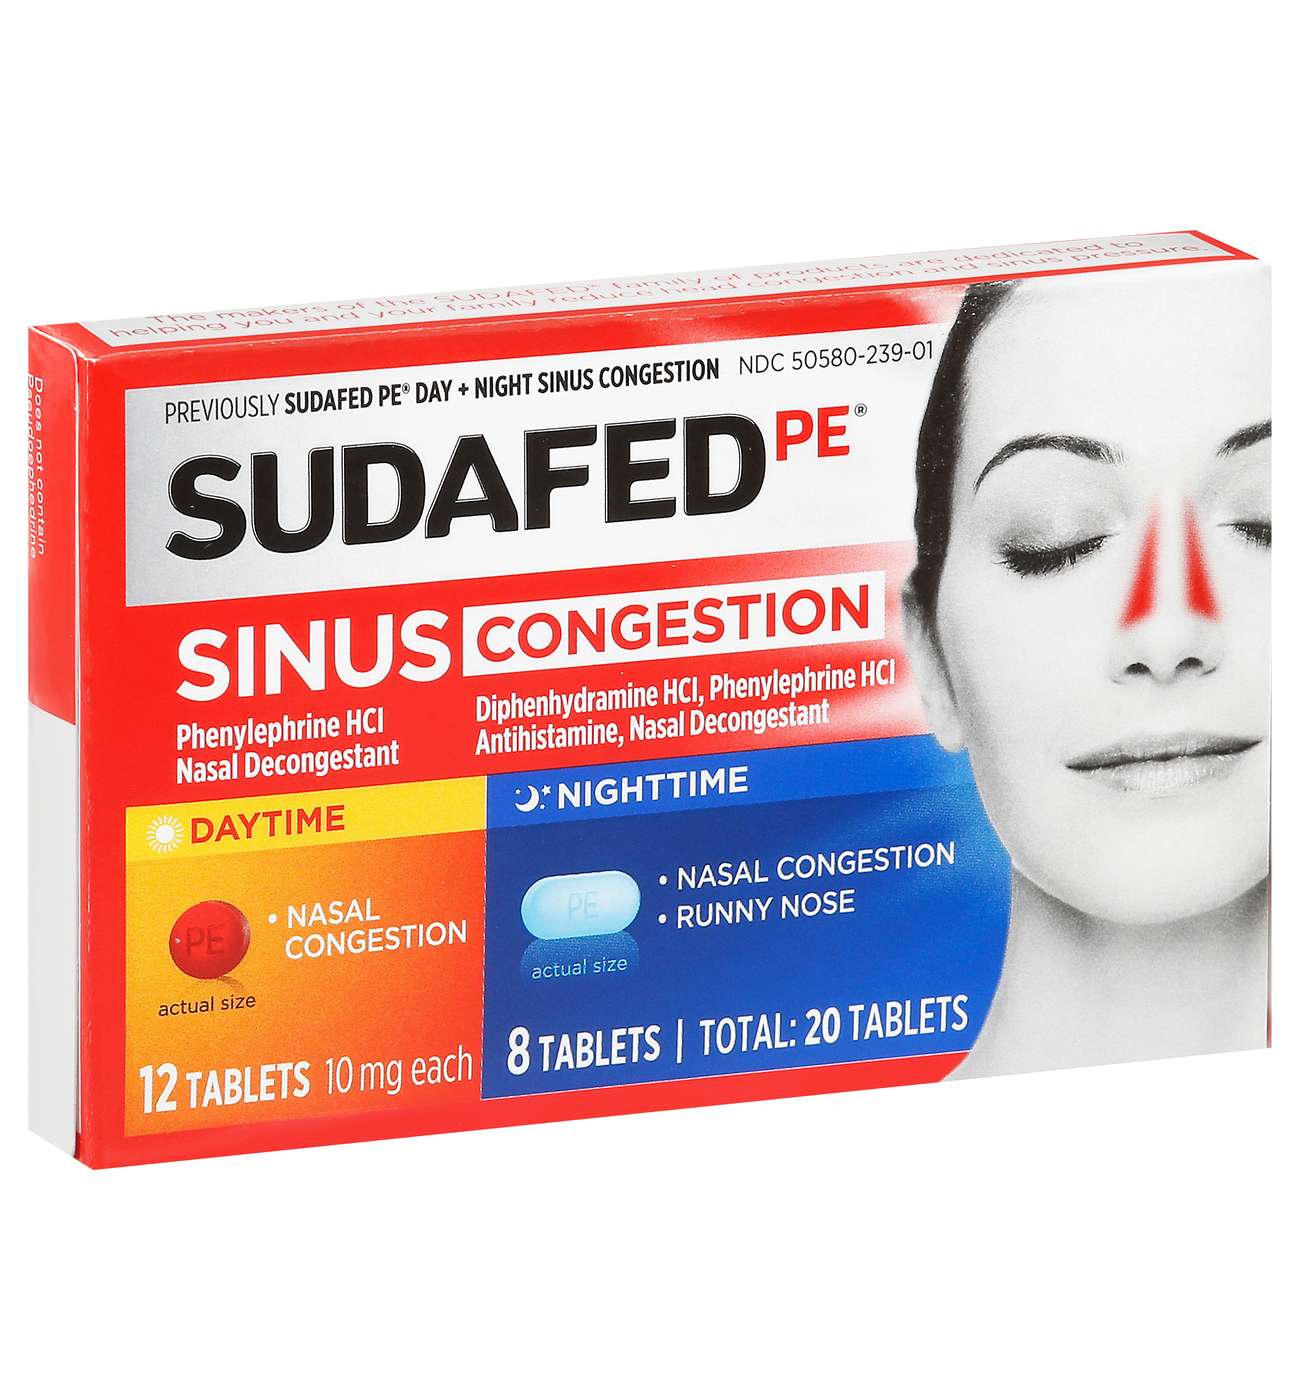 Sudafed PE Sinus Congestion Day + Night Tablets; image 4 of 6